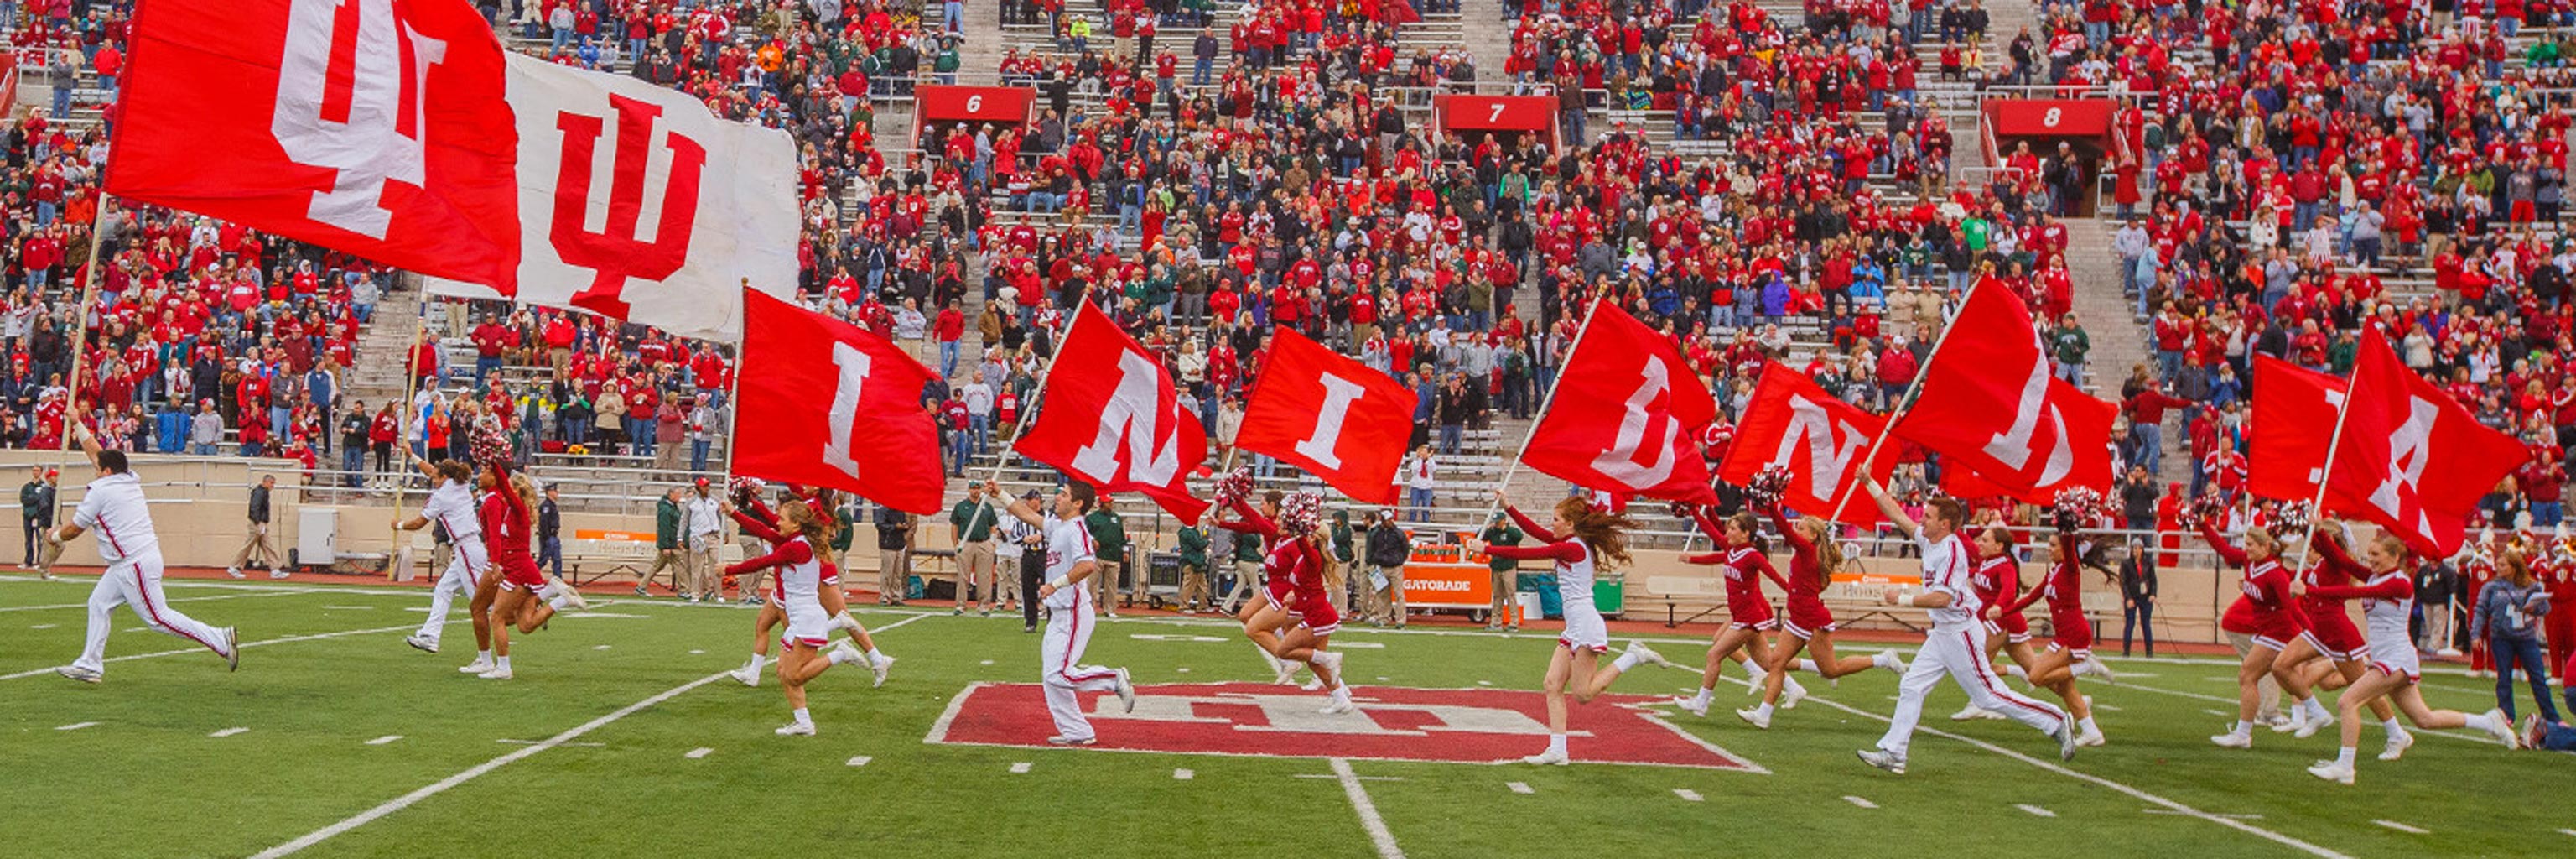 Indiana University cheering team running down football field with school flags